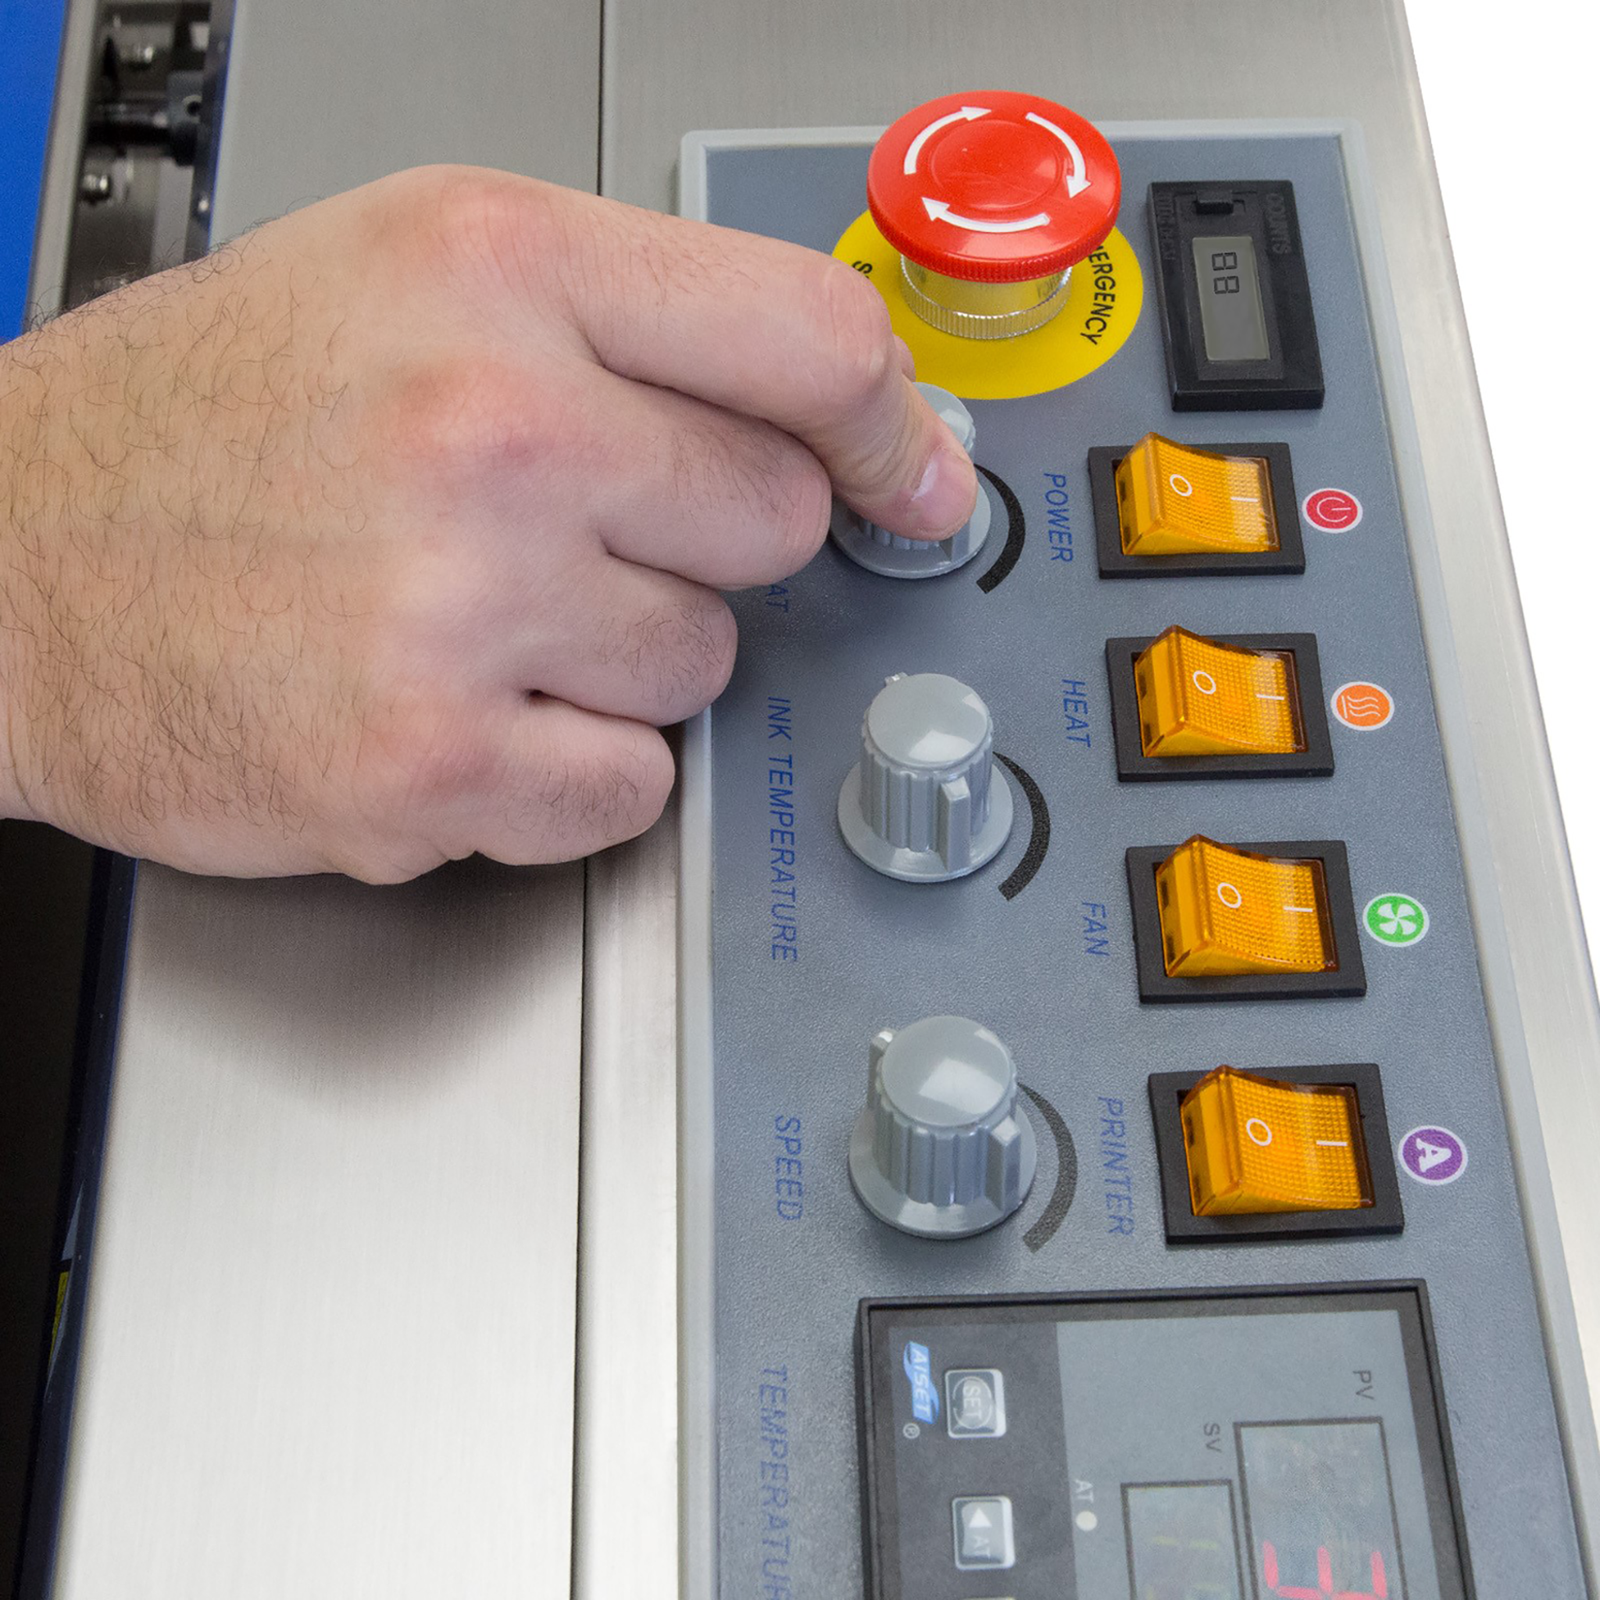 operator adjusting a dial on the control panel of a stainless steel JORESTECH continuous band sealer to start sealing plastic bags